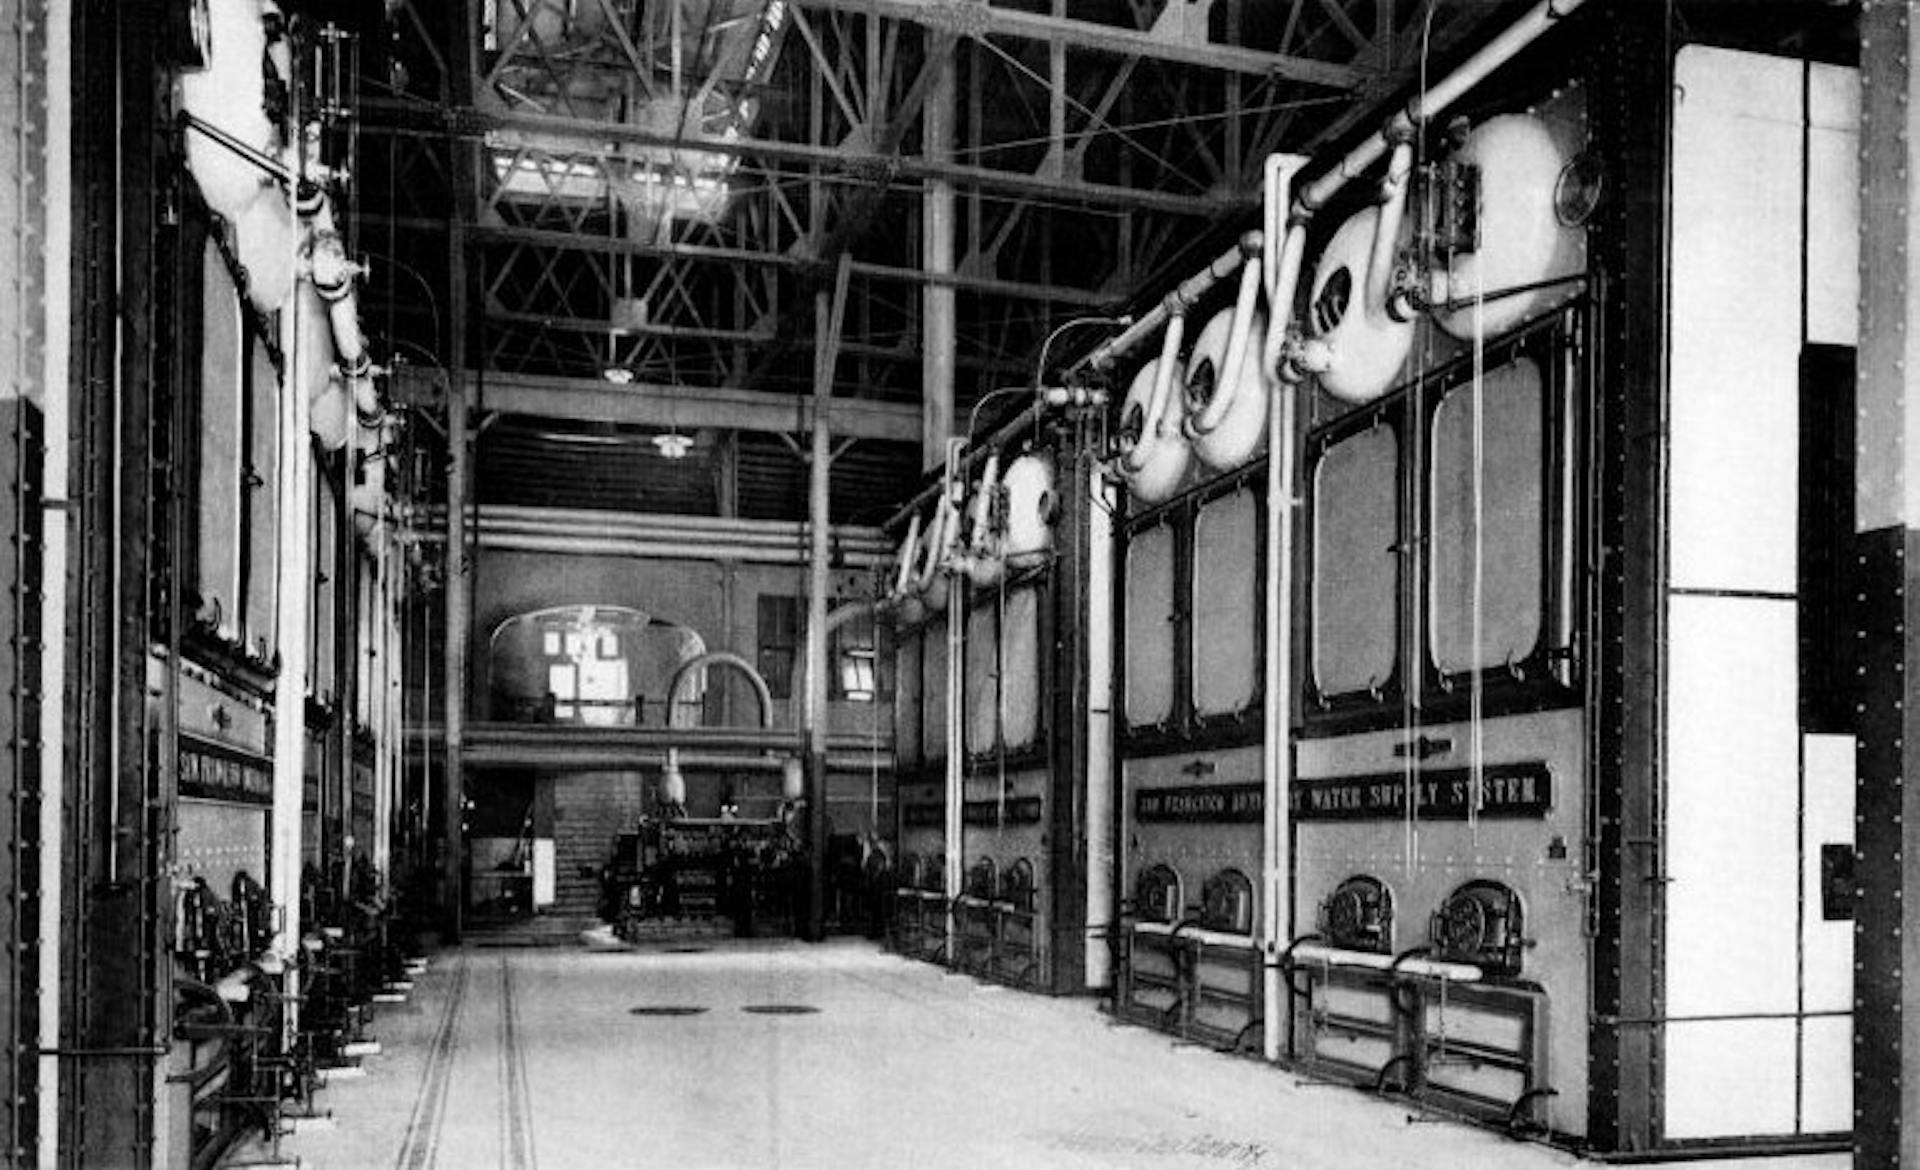 City of San Francisco, Cal., Fire Fighting Station. No. 1. 2800 Horse Power of Babcock & Wilcox Boilers, Equipped for Burning Oil Fuel